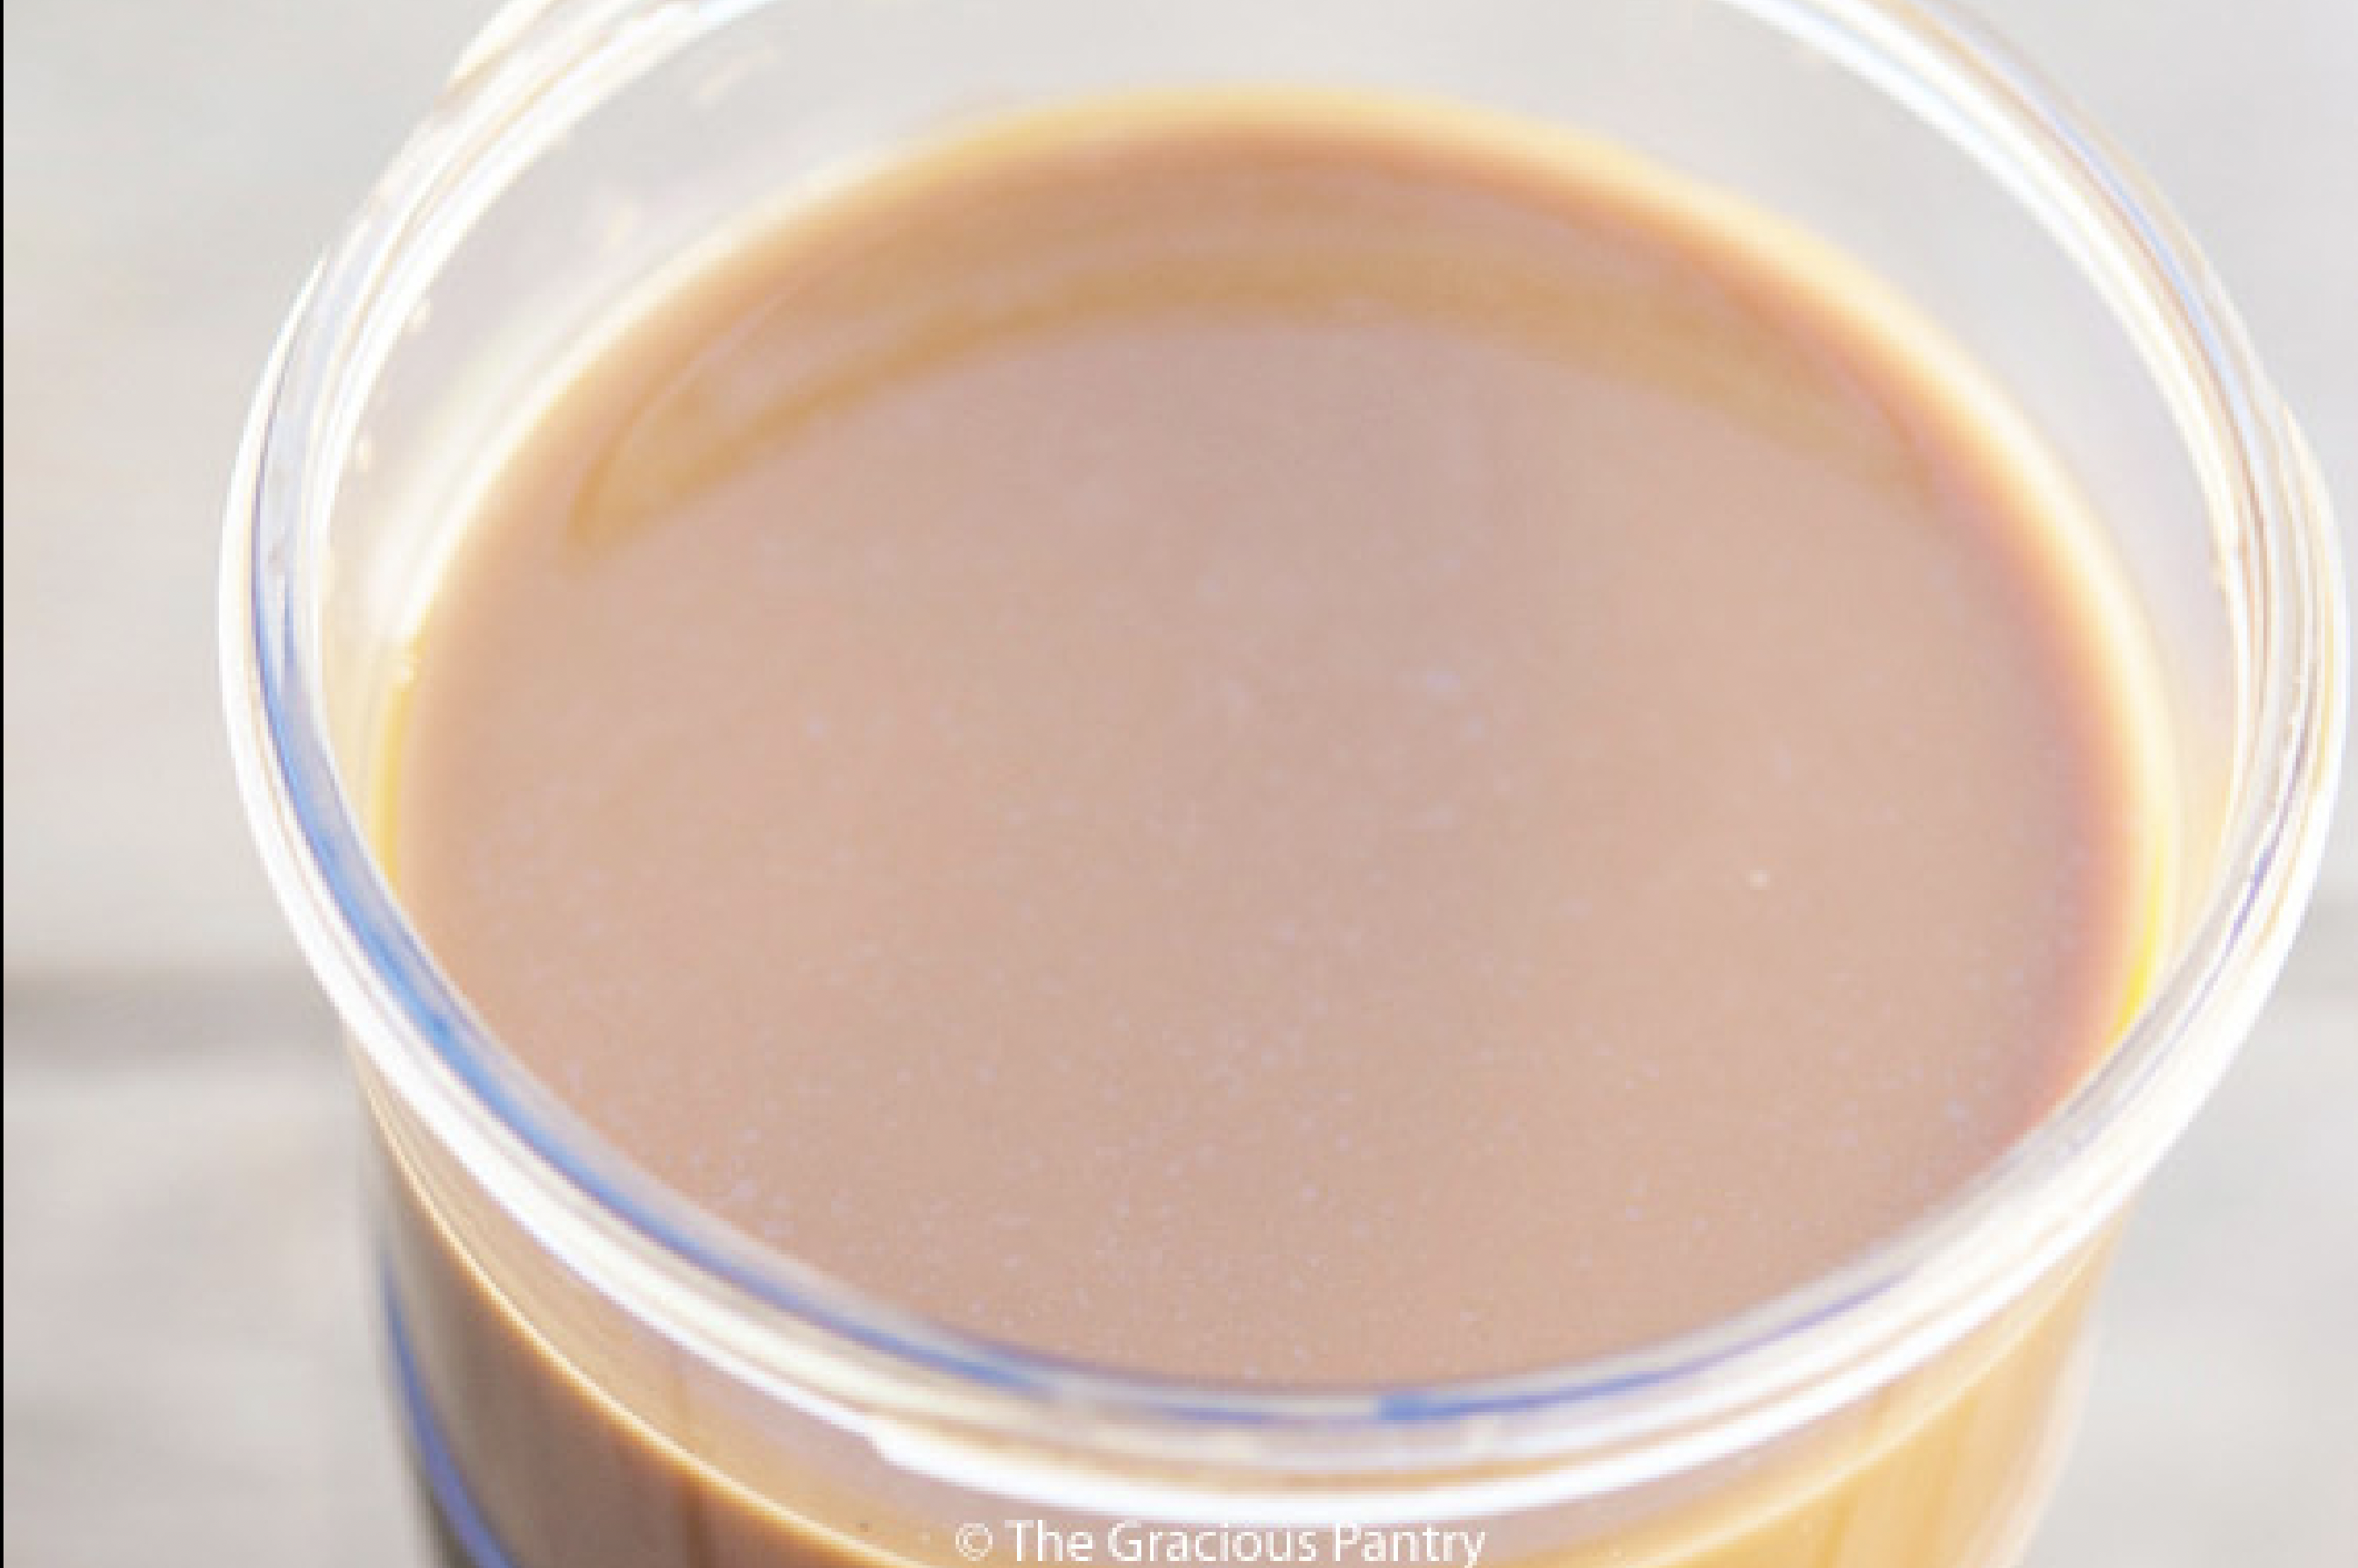 Enjoy this dairy-free latte in minutes at home!<p><b><a href="https://www.thegraciouspantry.com/clean-eating-coconut-latte/">Get recipe</a></b></p>